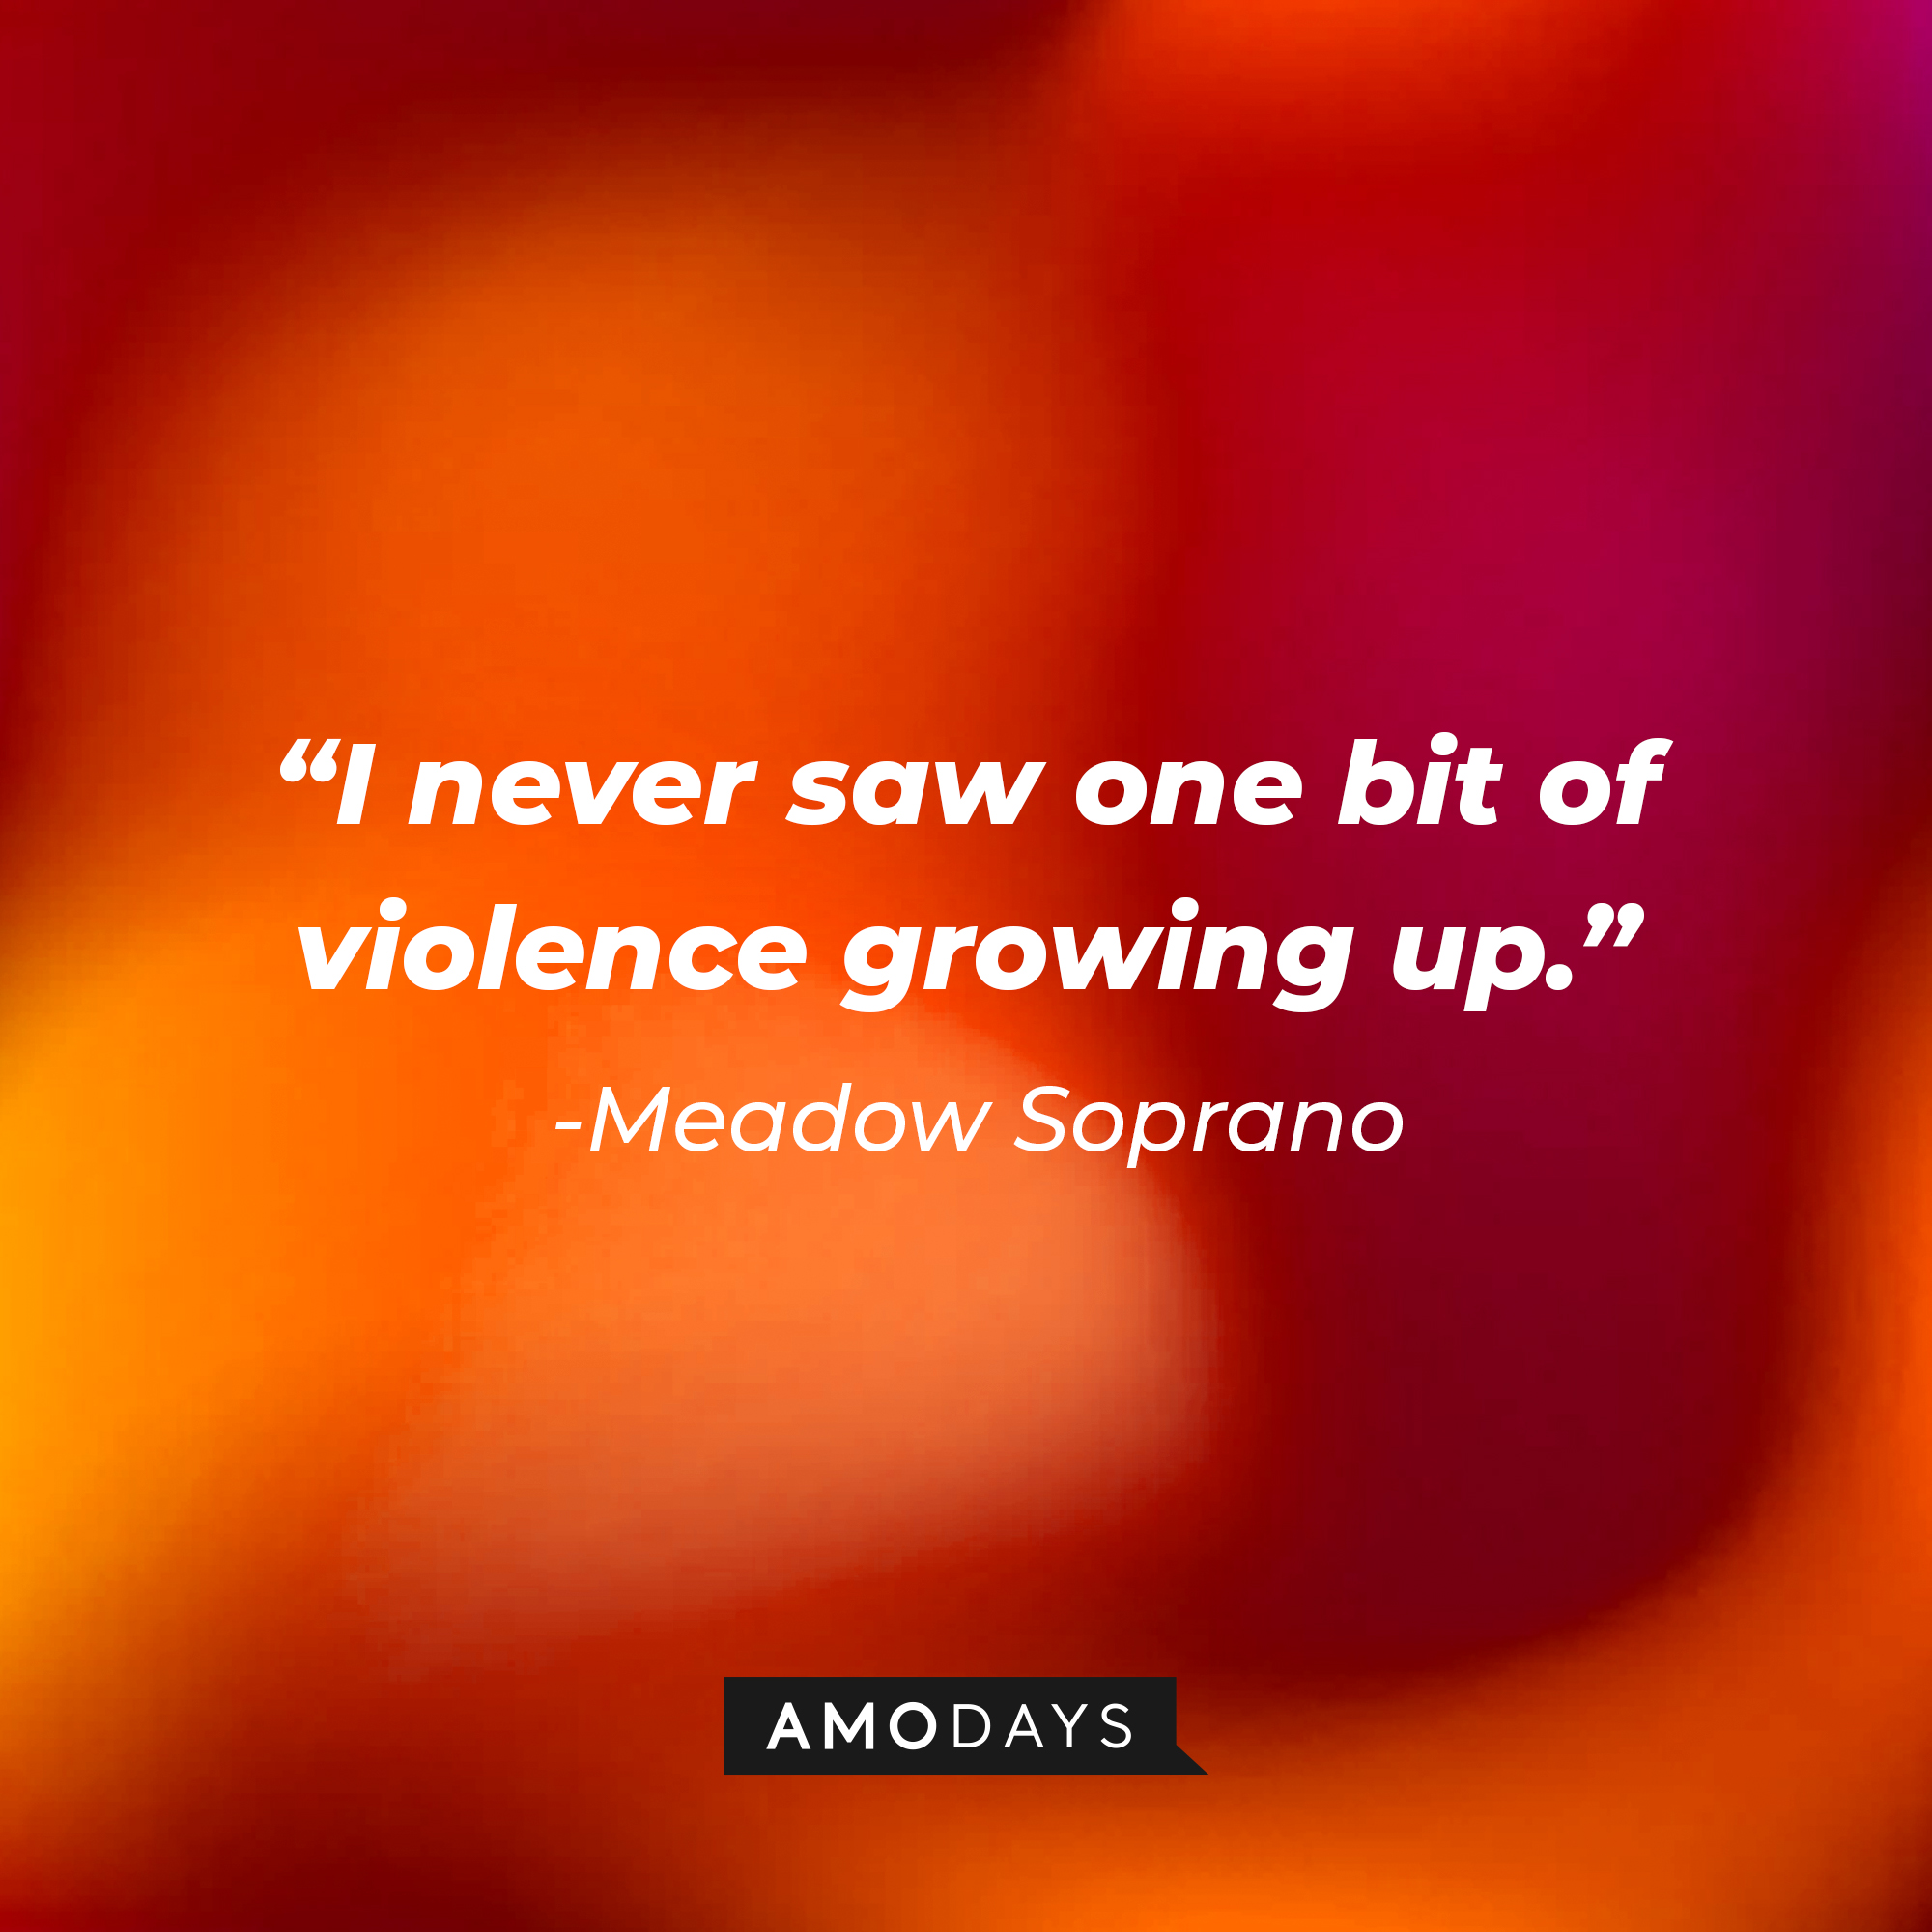 Meadow Soprano’s quote: “I never saw one bit of violence growing up.” | Source: AmoDays